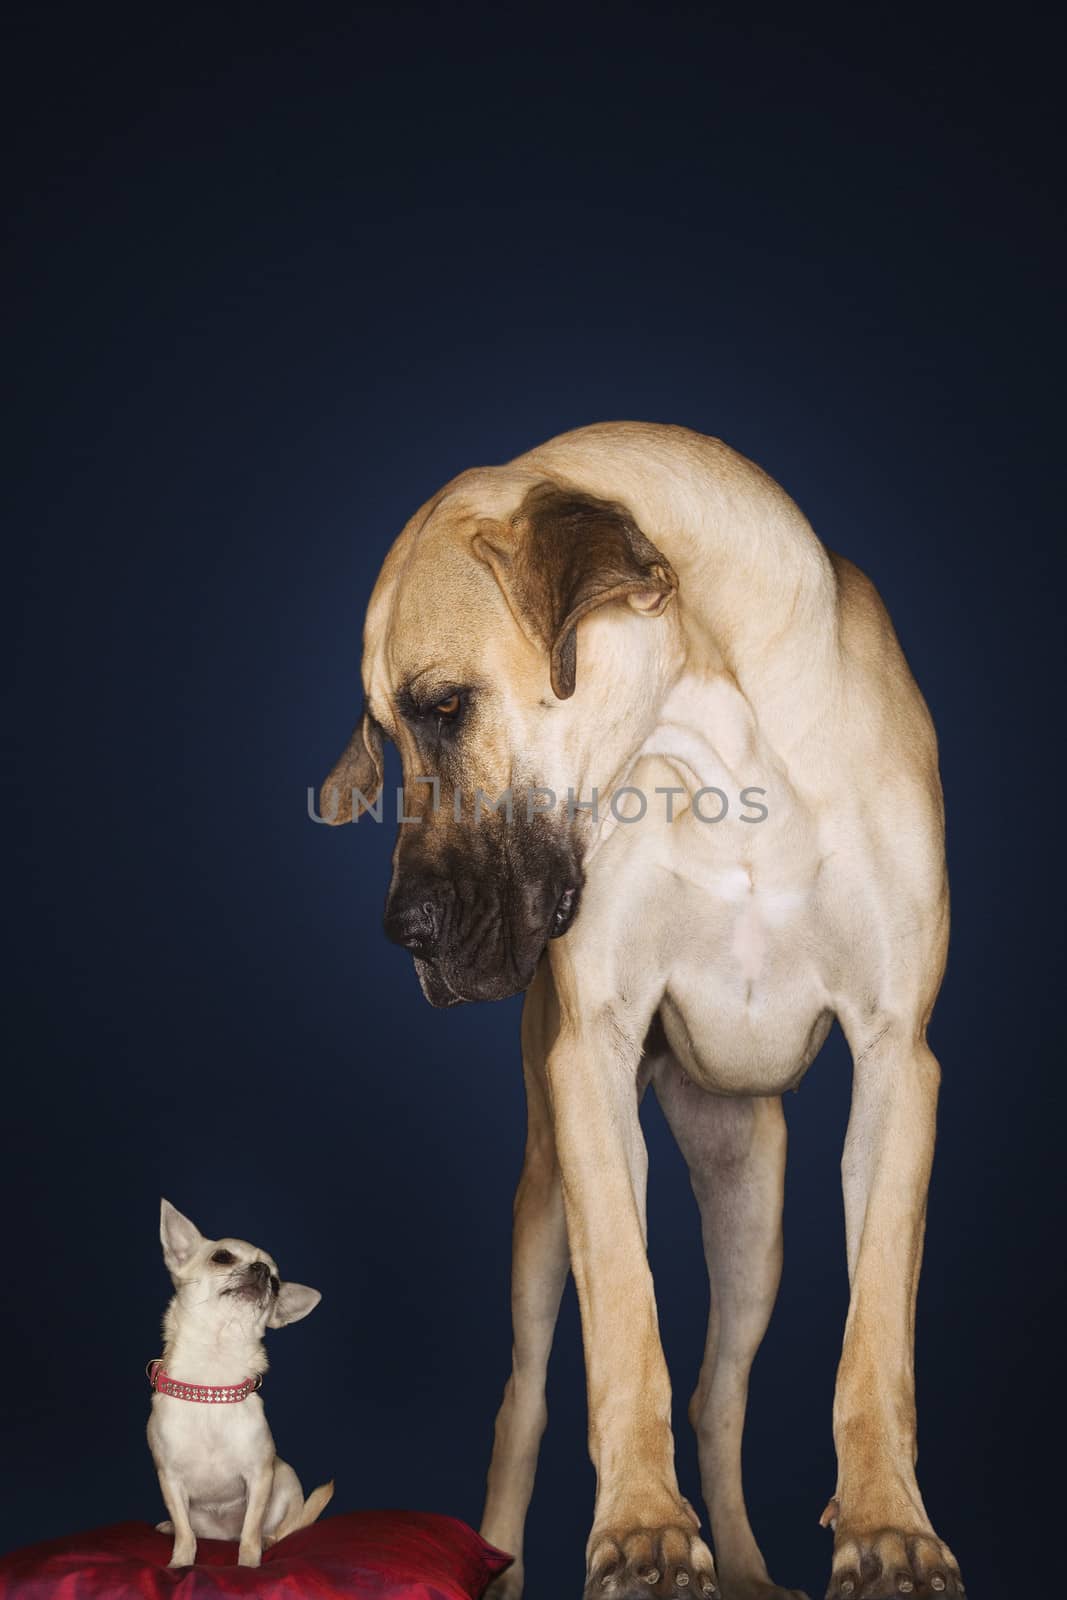 Chihuahua sitting on red pillow with Great Dane standing alongside against black background by moodboard